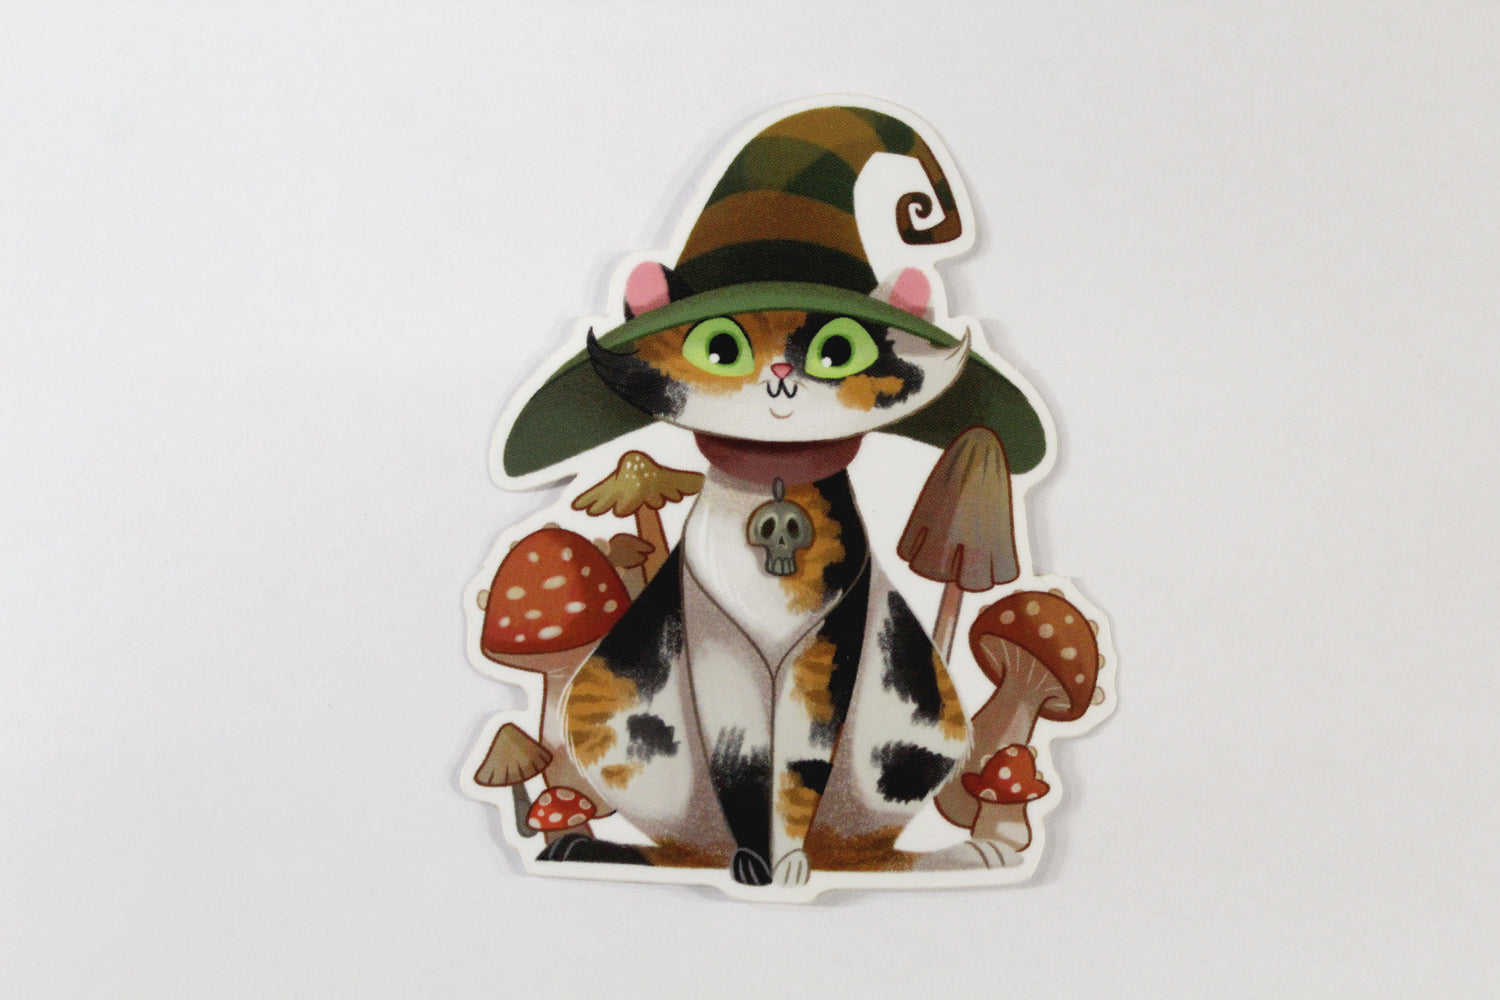 Witch Kitty Glossy Vinyl Sickers